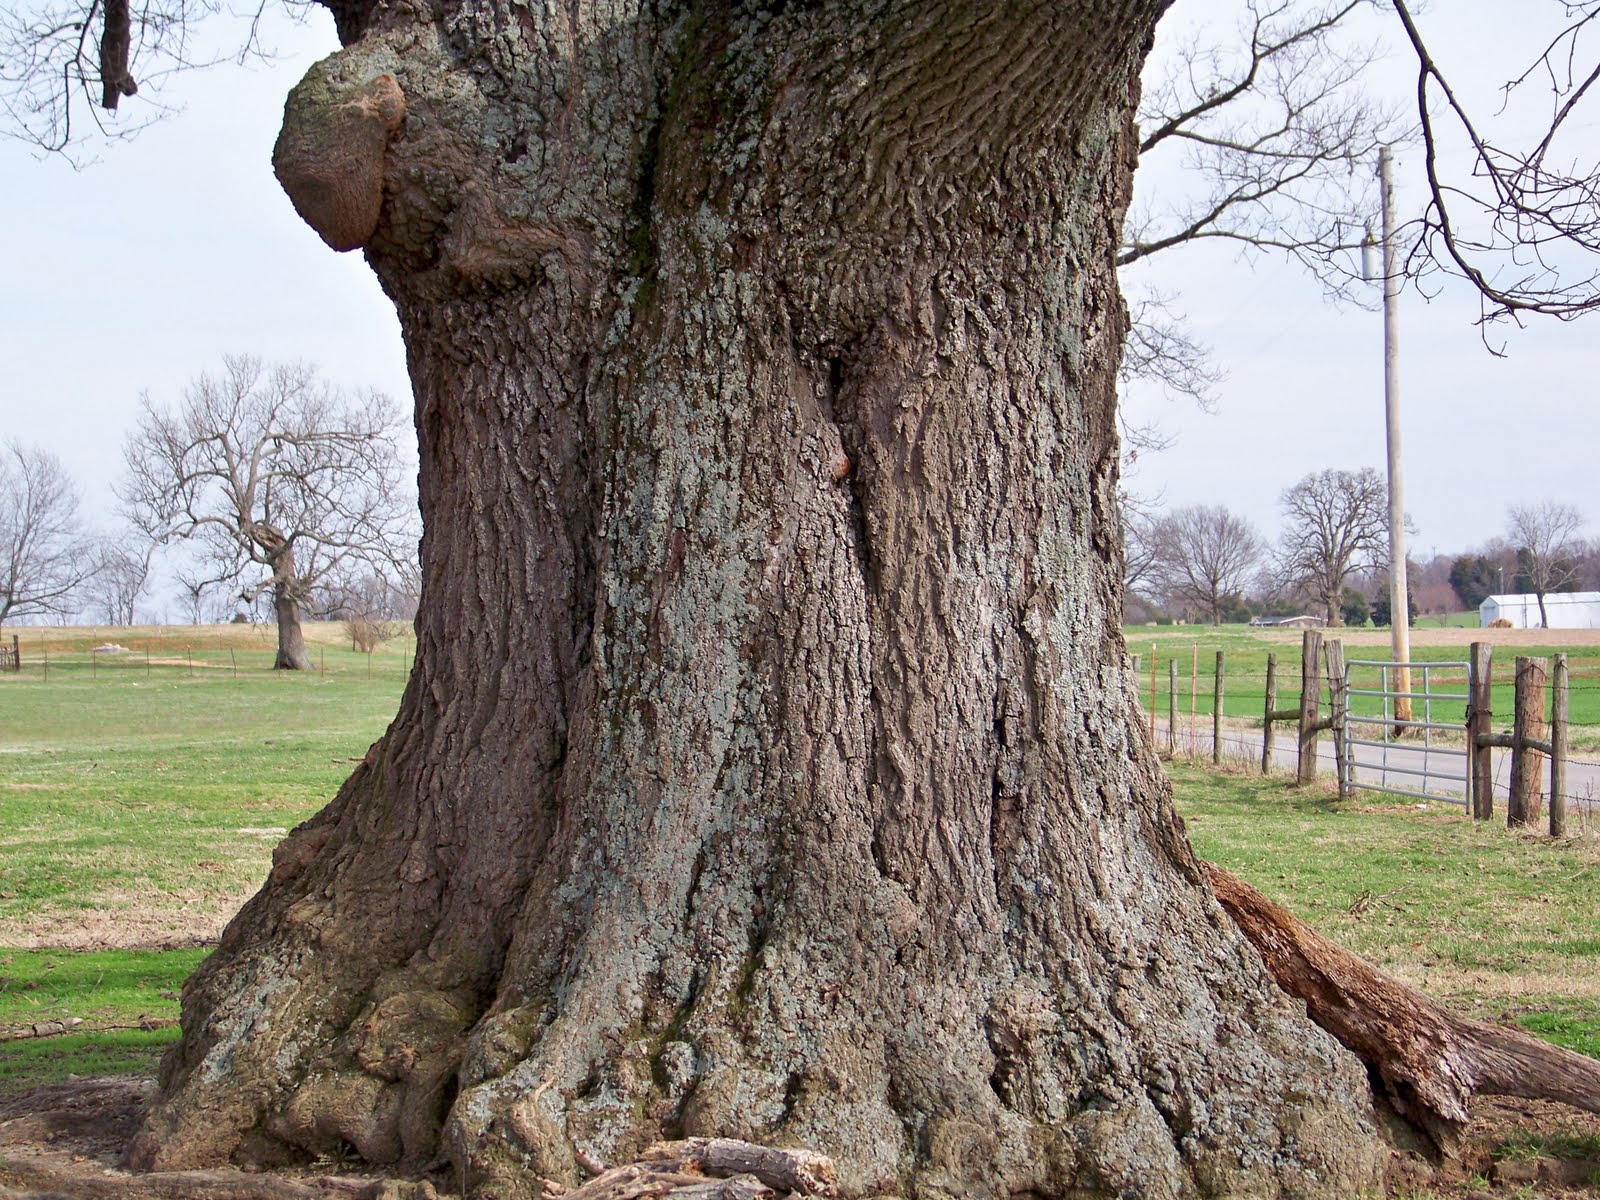 My Journey To Mindfulness: The Very Old Tree